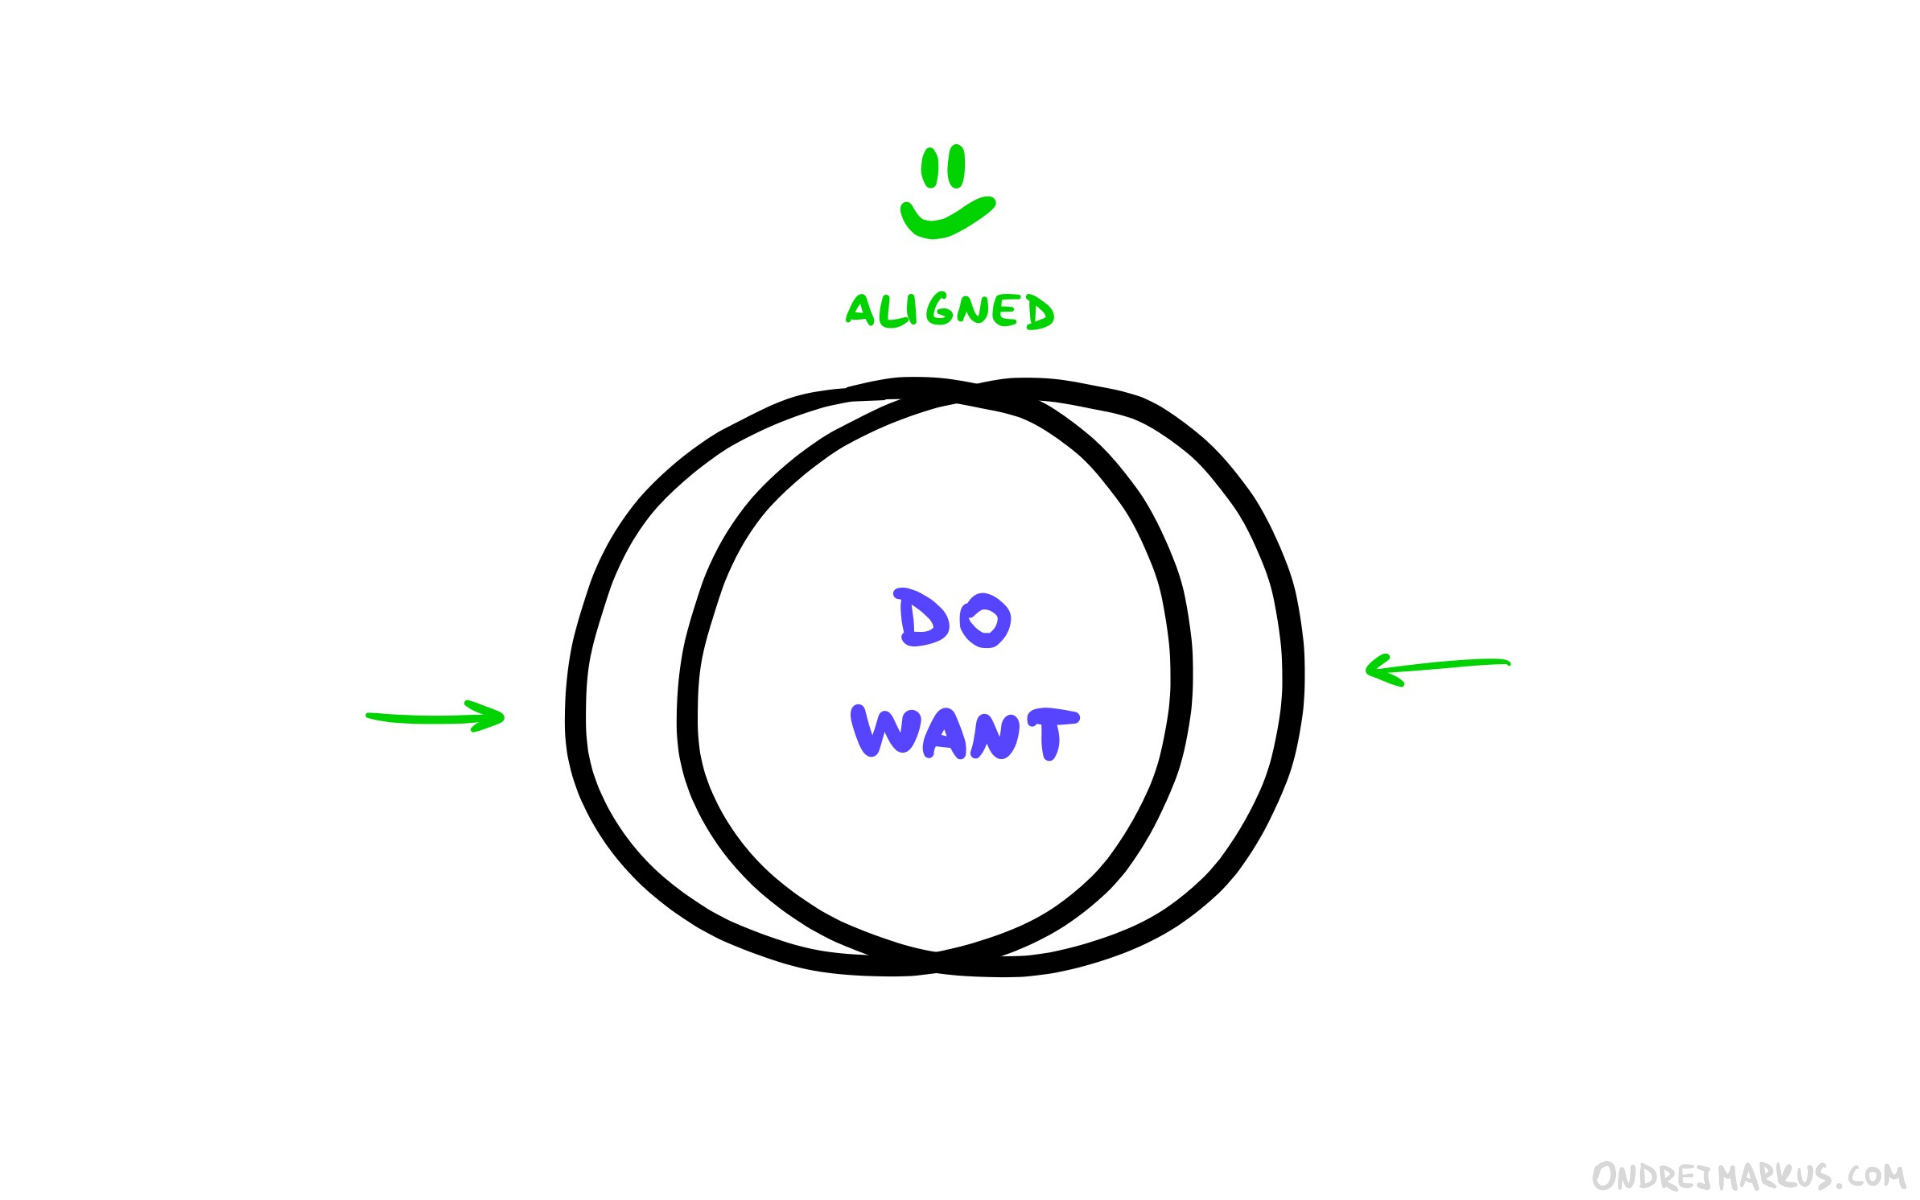 Aligned actions and needs = Meaningful work